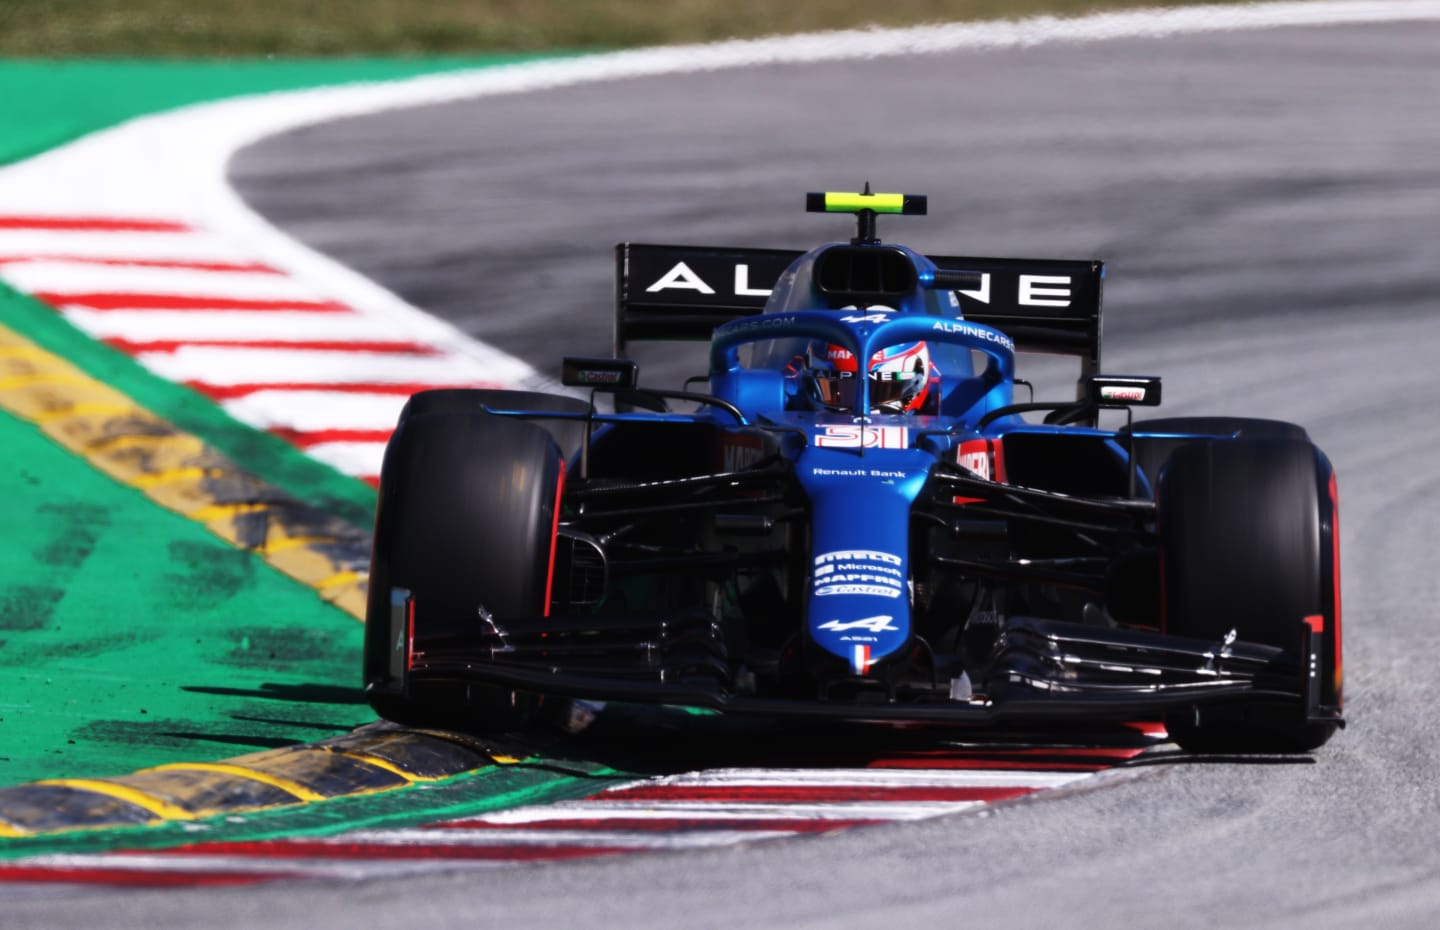 BARCELONA, SPAIN - MAY 08: Esteban Ocon of France driving the (31) Alpine A521 Renault on track during qualifying for the F1 Grand Prix of Spain at Circuit de Barcelona-Catalunya on May 08, 2021 in Barcelona, Spain. (Photo by Lars Baron/Getty Images)